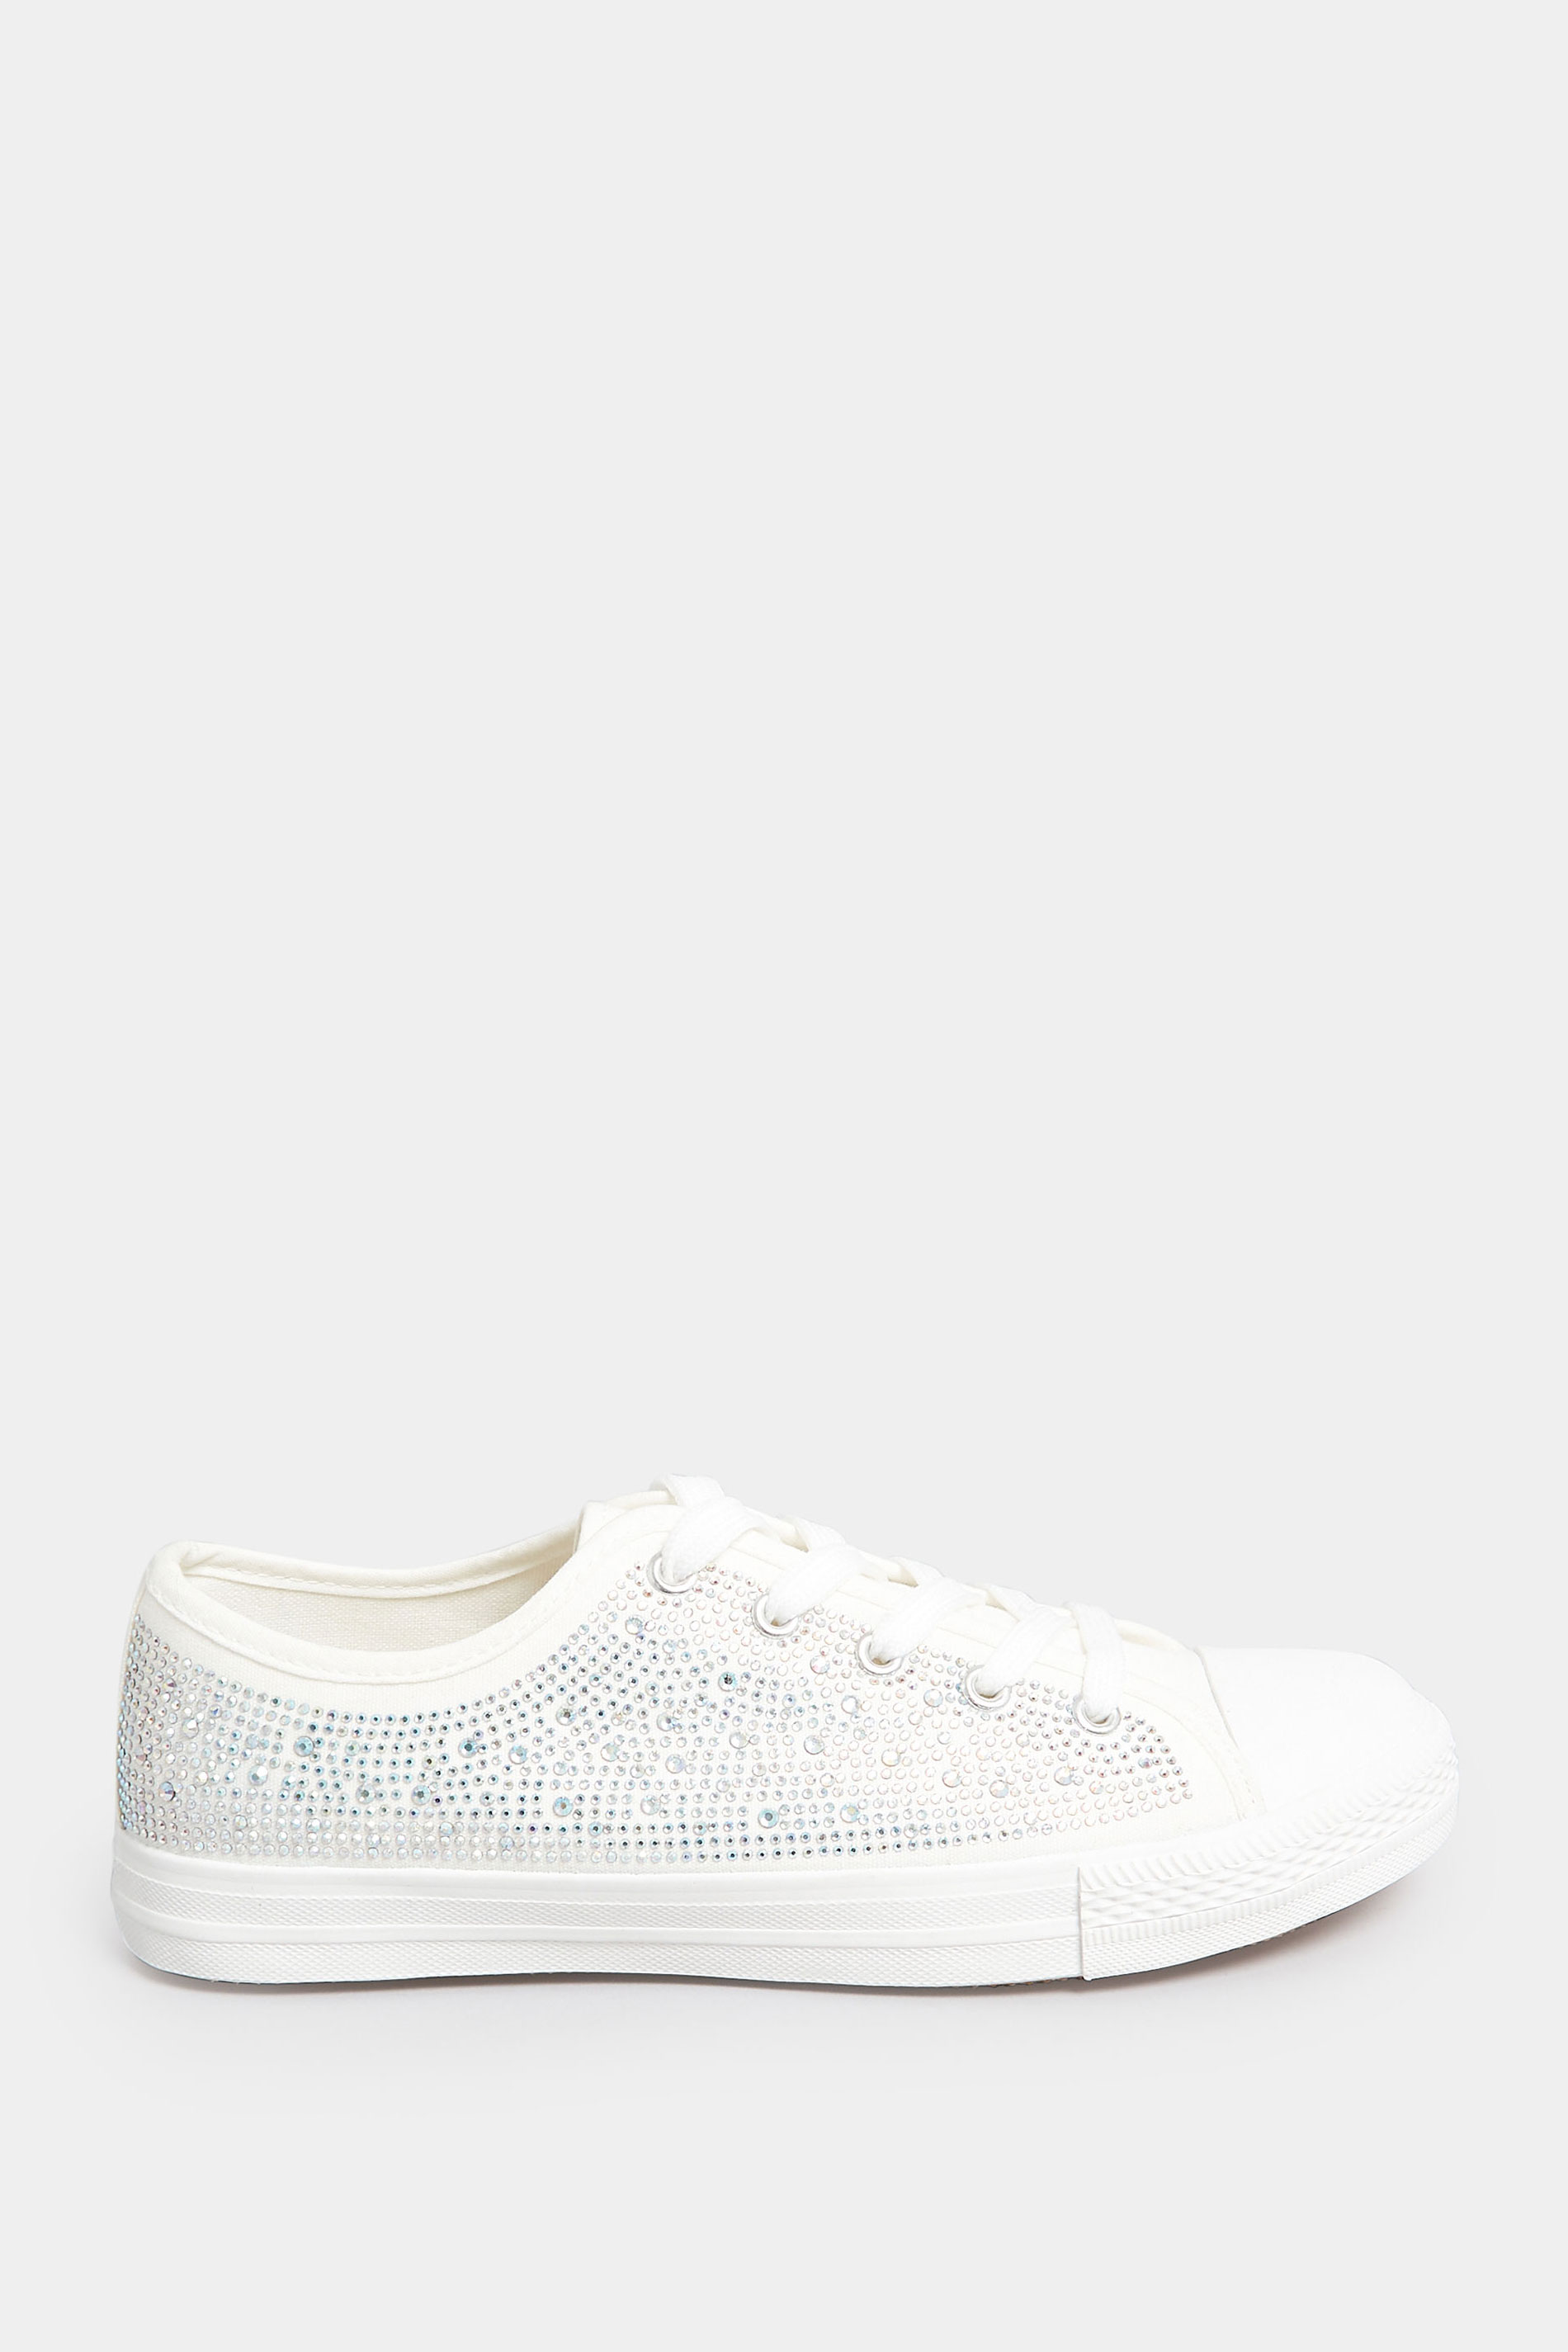 White Diamante Low Trainer In Wide E Fit | Yours Clothing 3